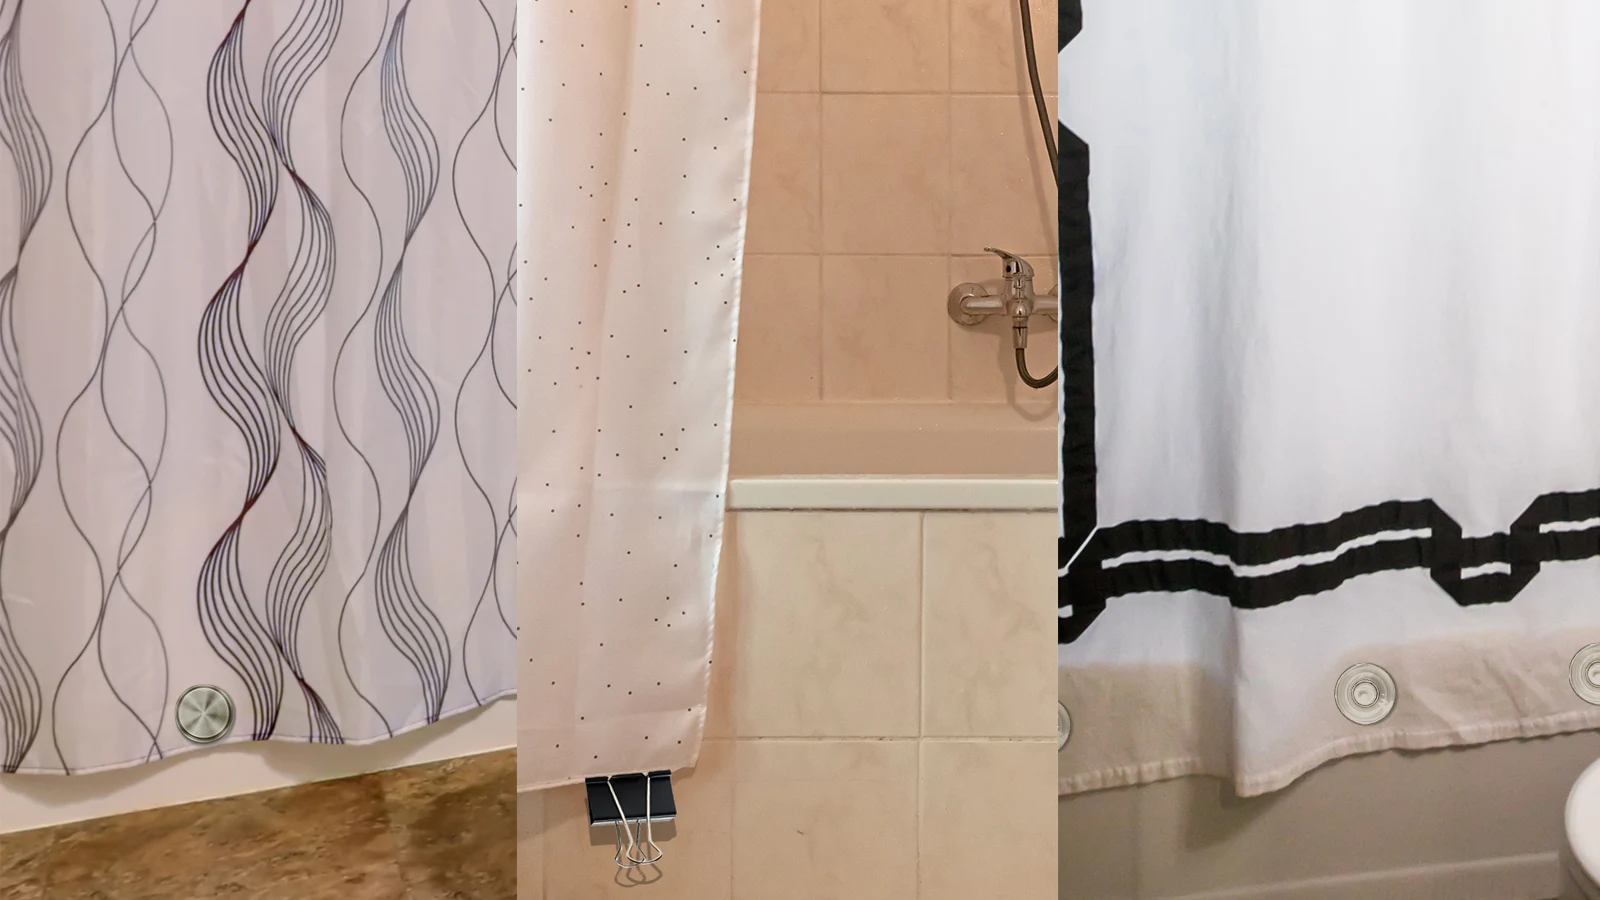 A bathroom with a shower curtain and a toilet, including tips on how to keep the shower curtain closed.